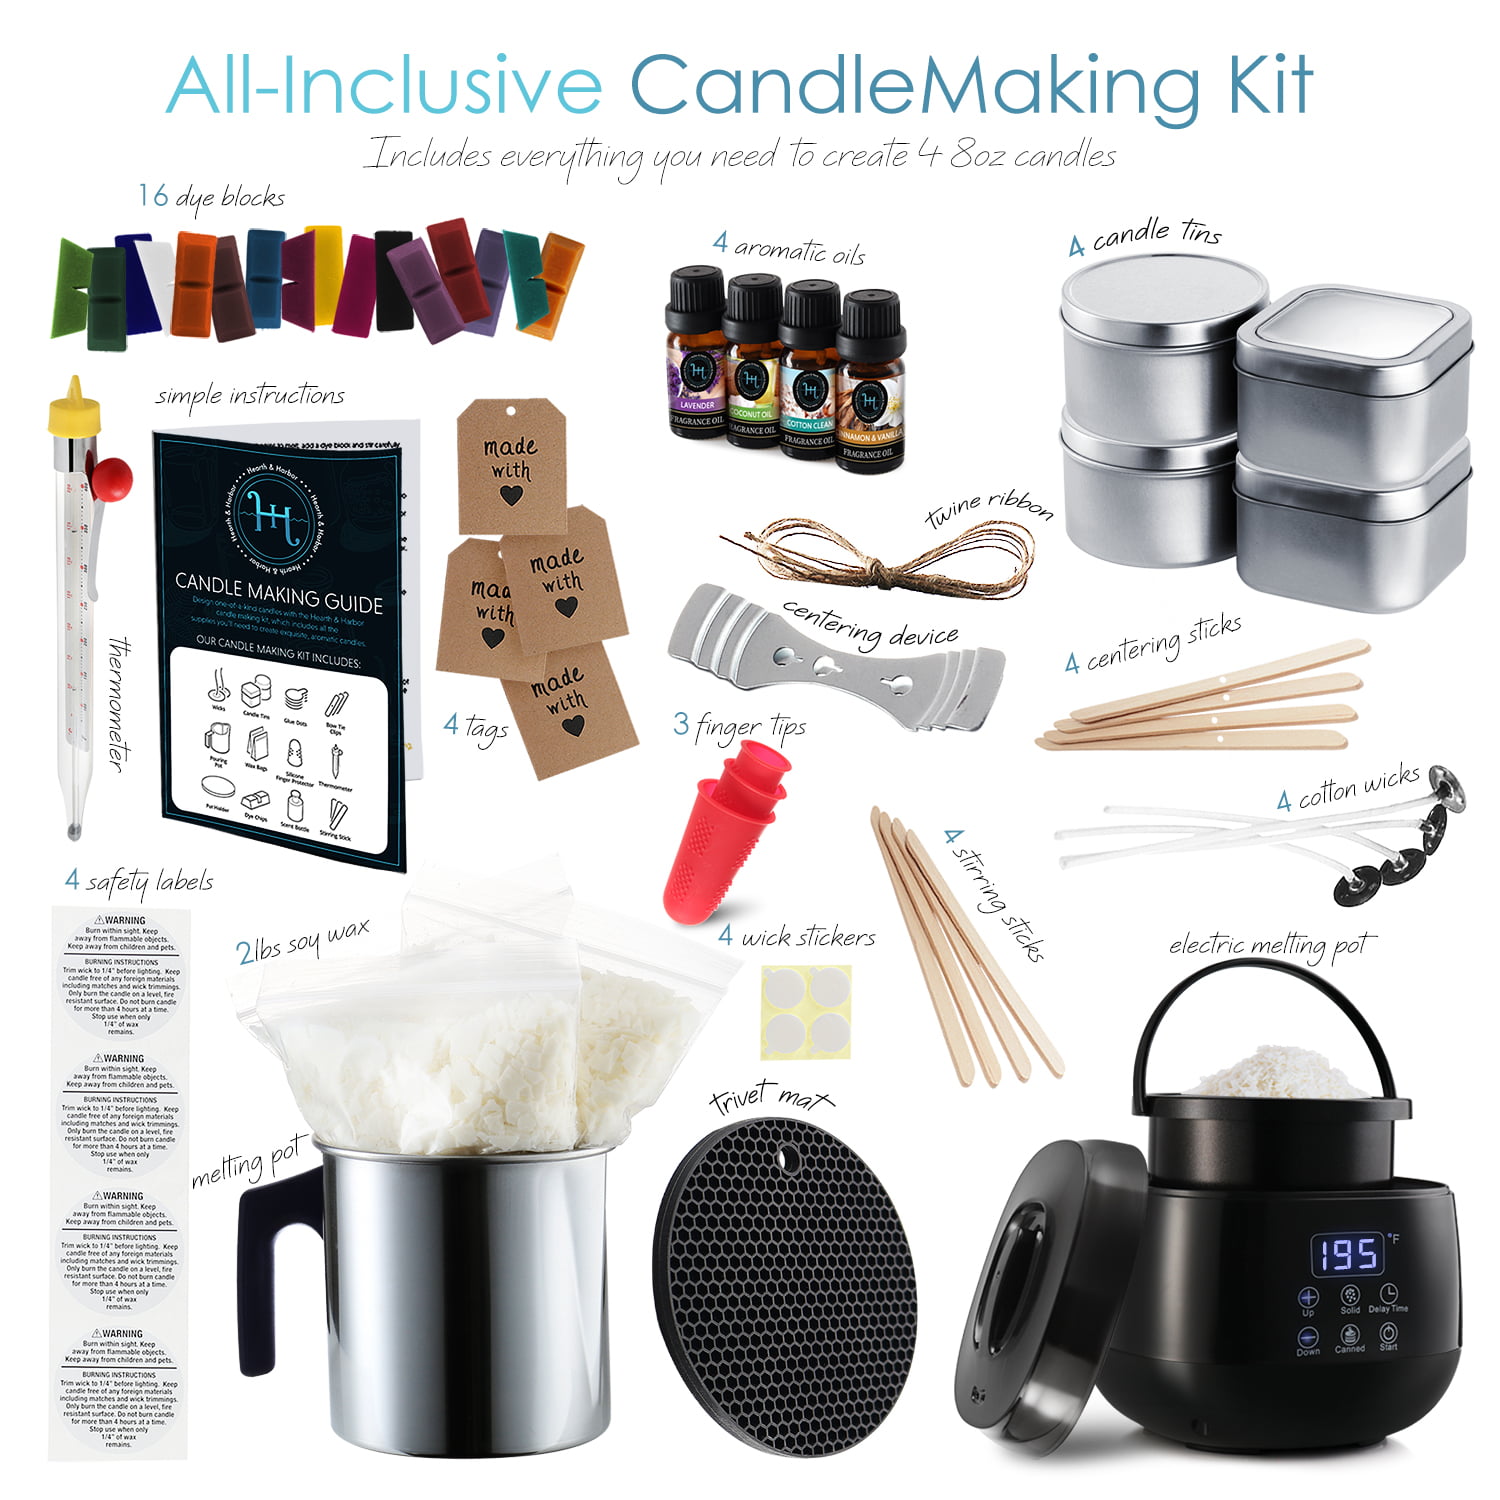 Hearth & Harbor Soy Candle Making Kit for Adults & Kids, DIY Candle Making  Supplies for Beginners, Natural Soy Wax Complete Candle Making Kits - 2 Lbs